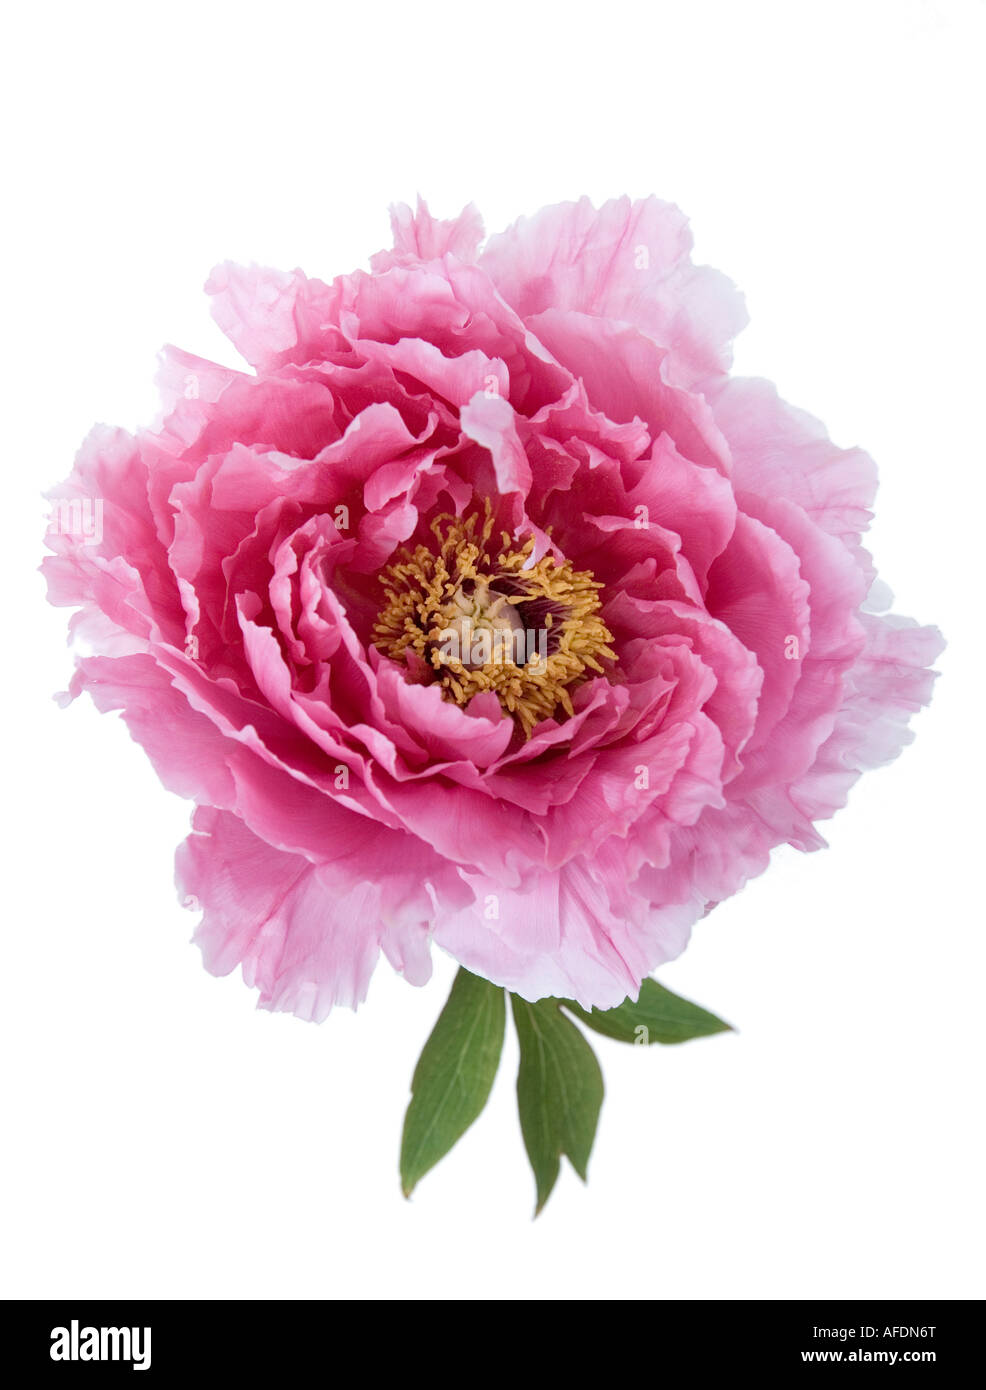 Close up shot of peony flower against a white background Stock Photo